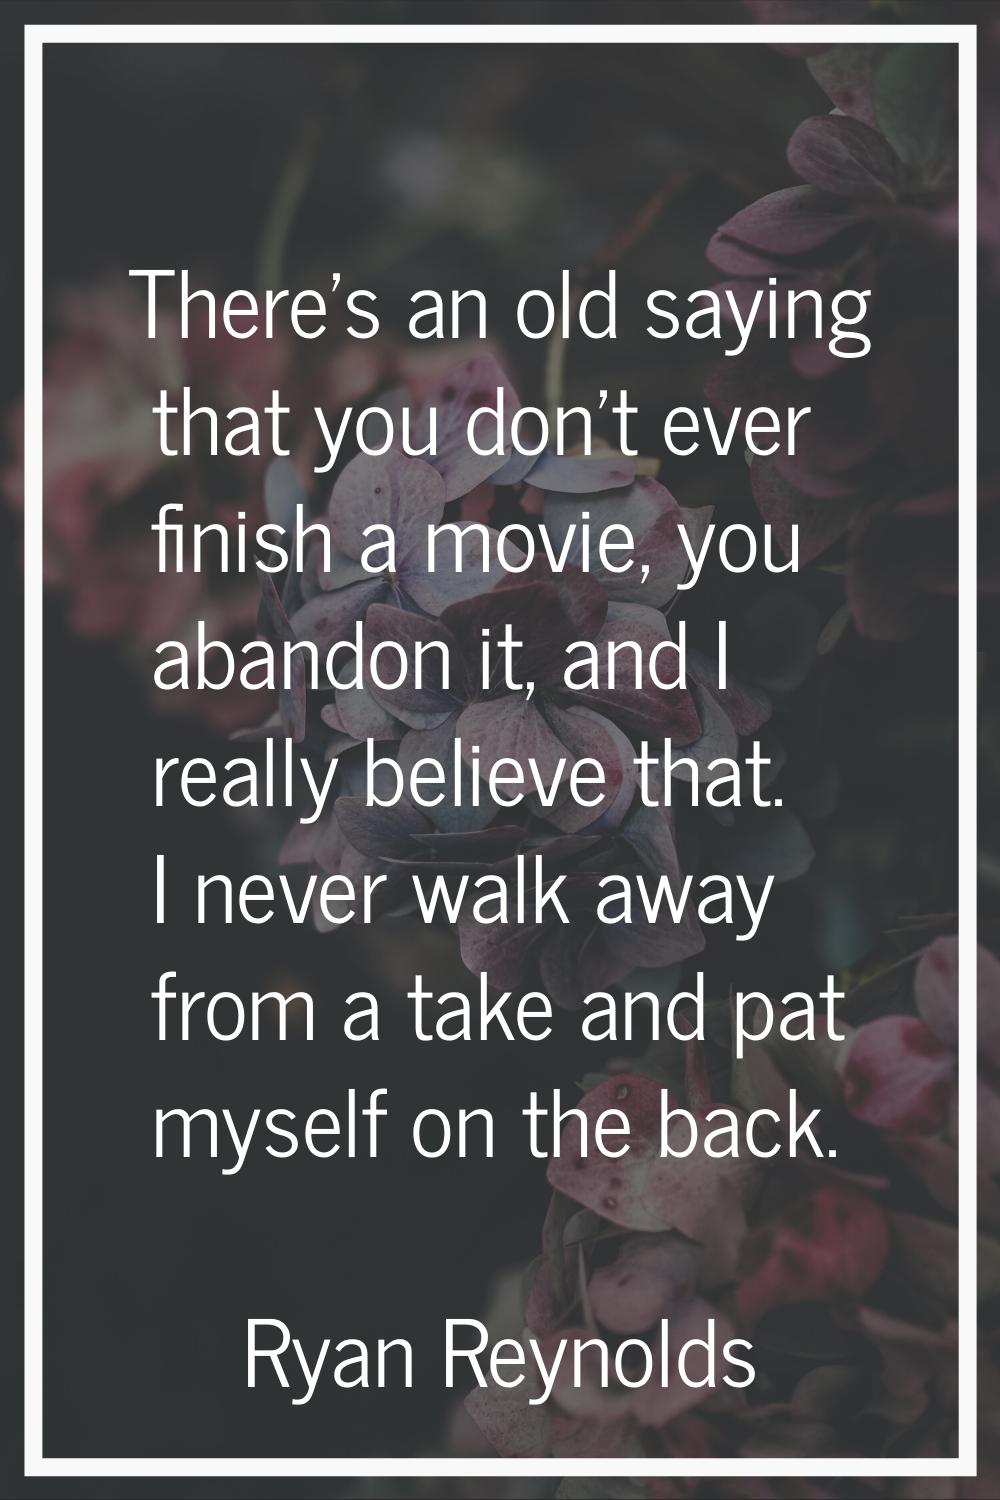 There's an old saying that you don't ever finish a movie, you abandon it, and I really believe that